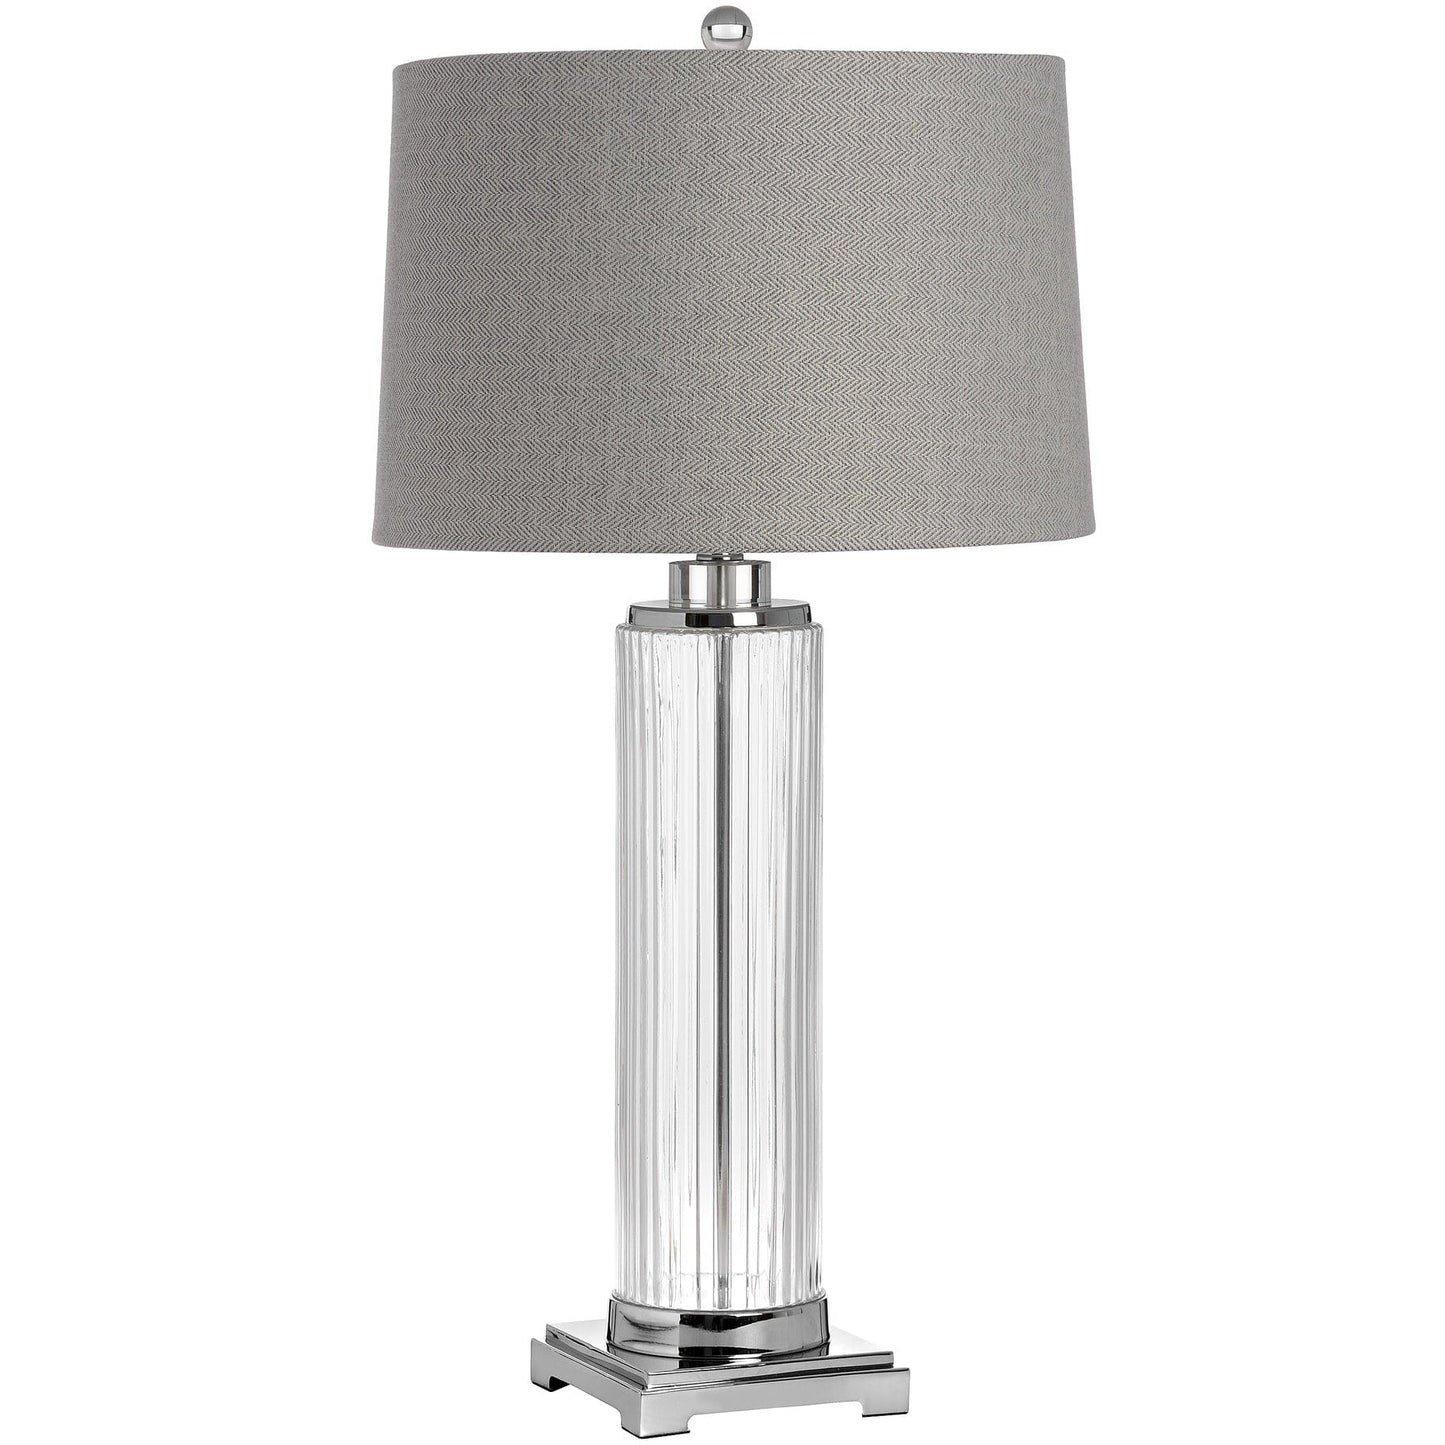 Hill Interiors Table Lamp Roma Glass Table Lamp